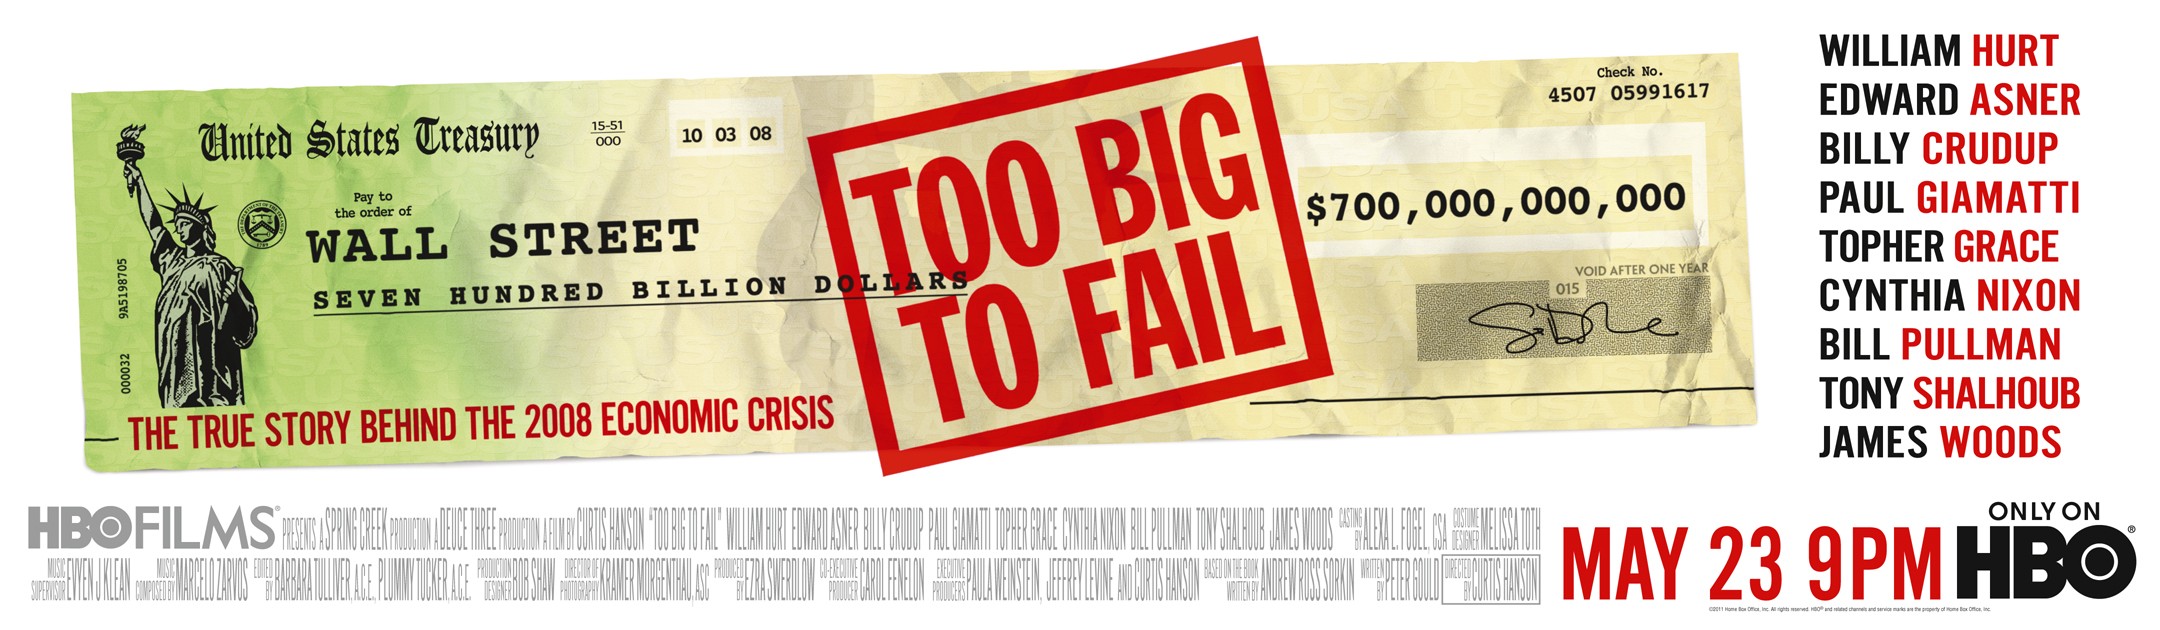 Mega Sized TV Poster Image for Too Big to Fail (#2 of 2)